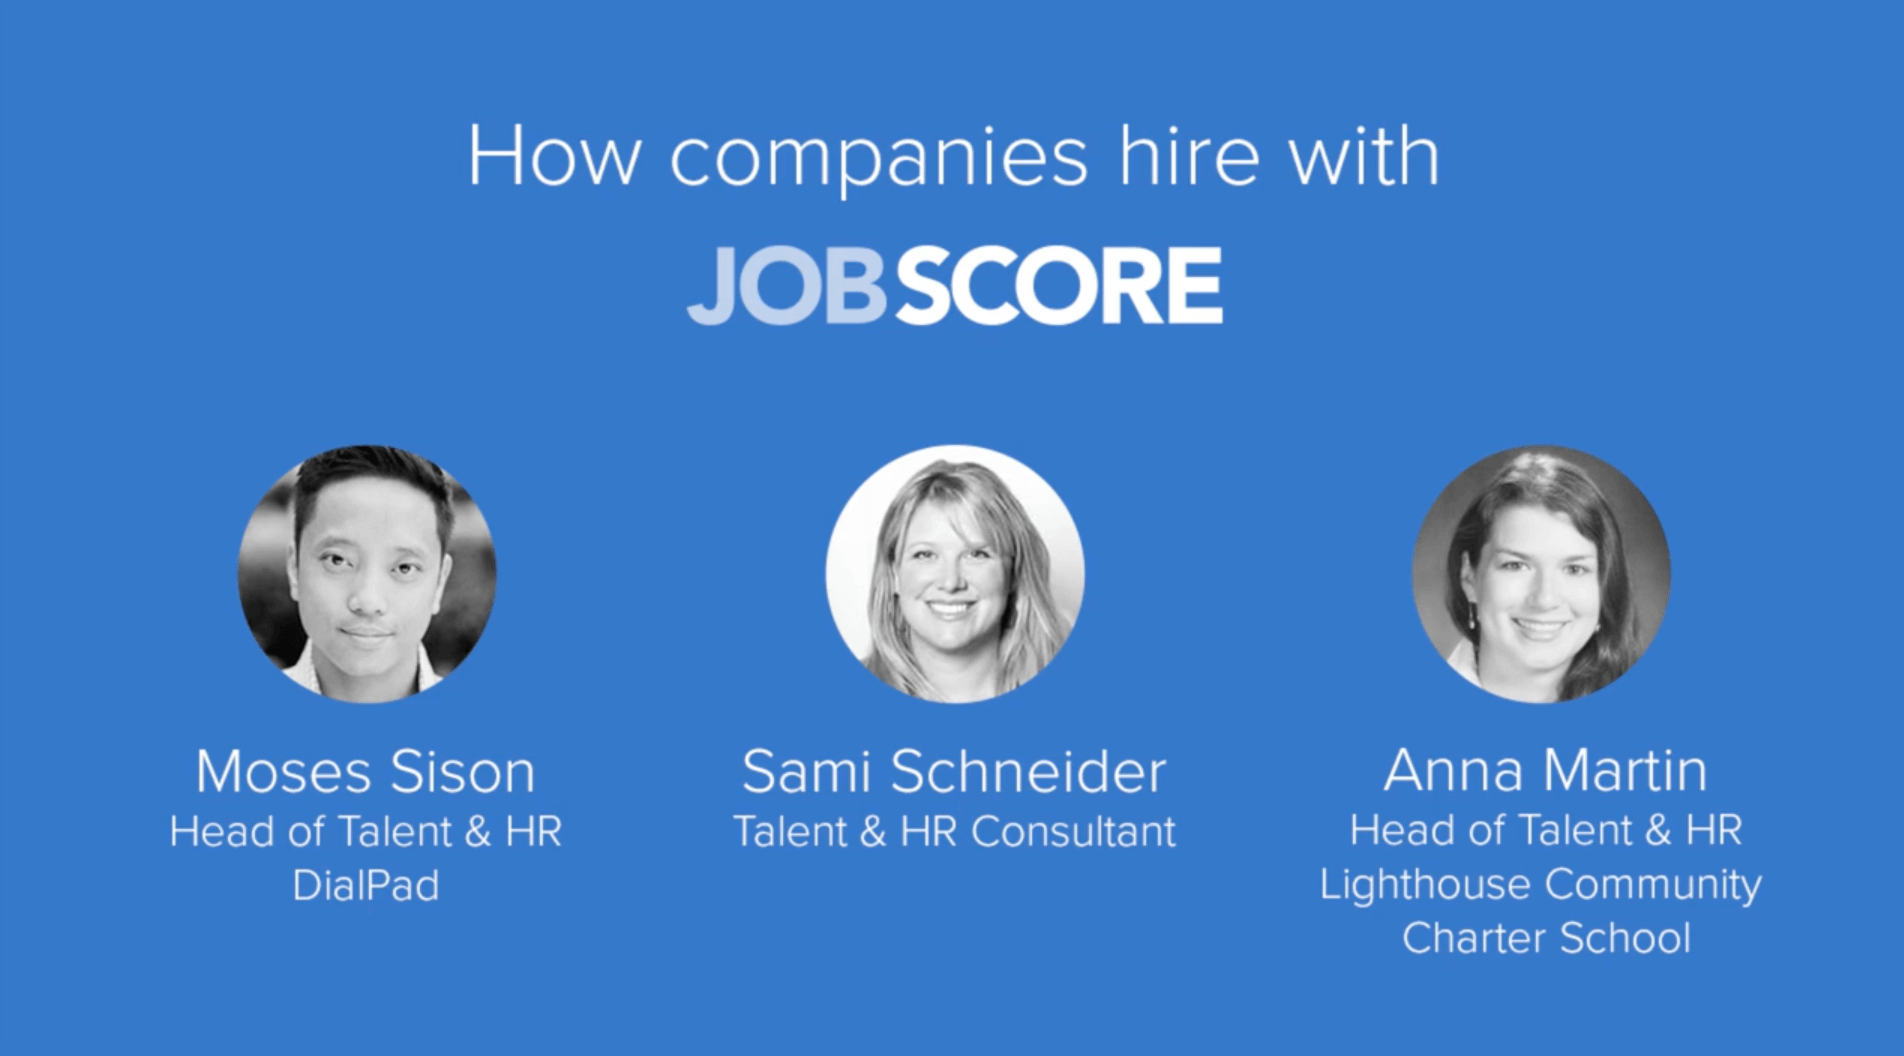 Video reviews of top companies using JobScore Applicant Tracking System.